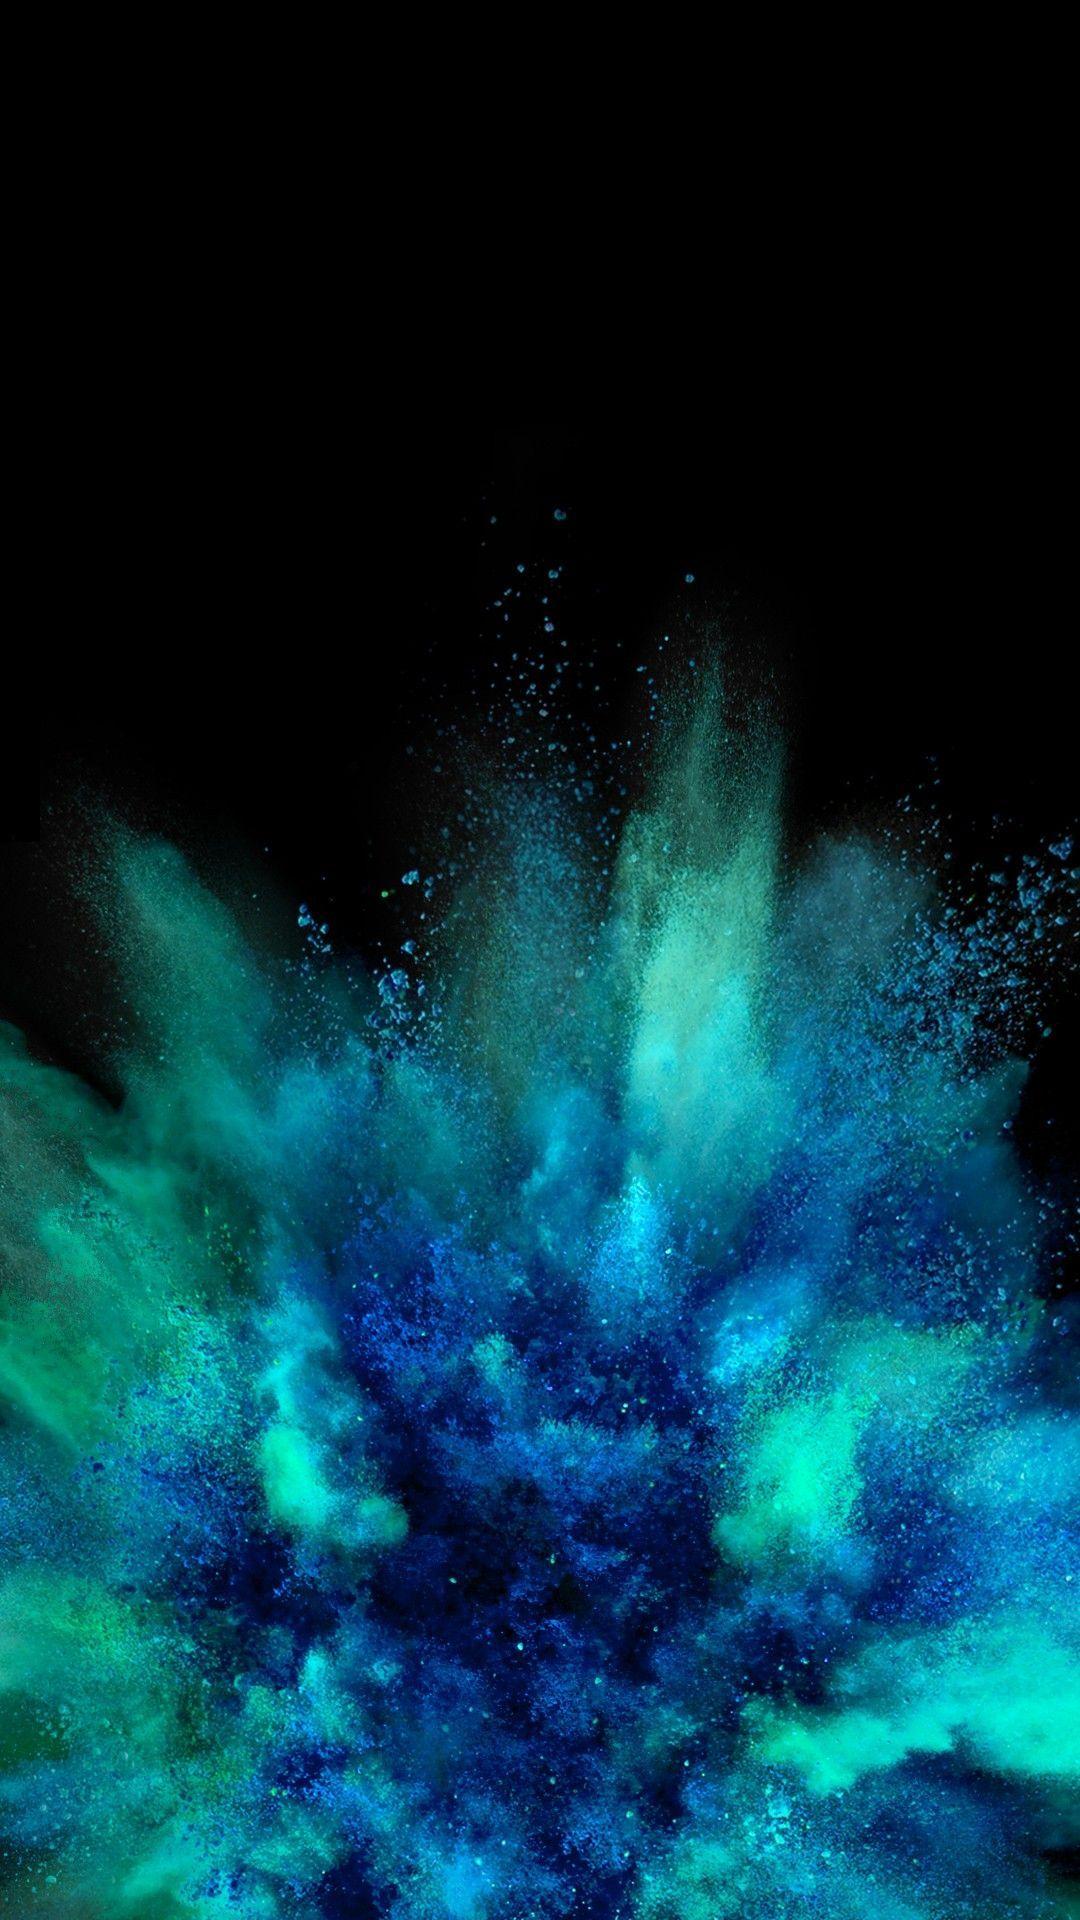 General 1080x1920 powder colorful. Blue wallpaper iphone, Ipod